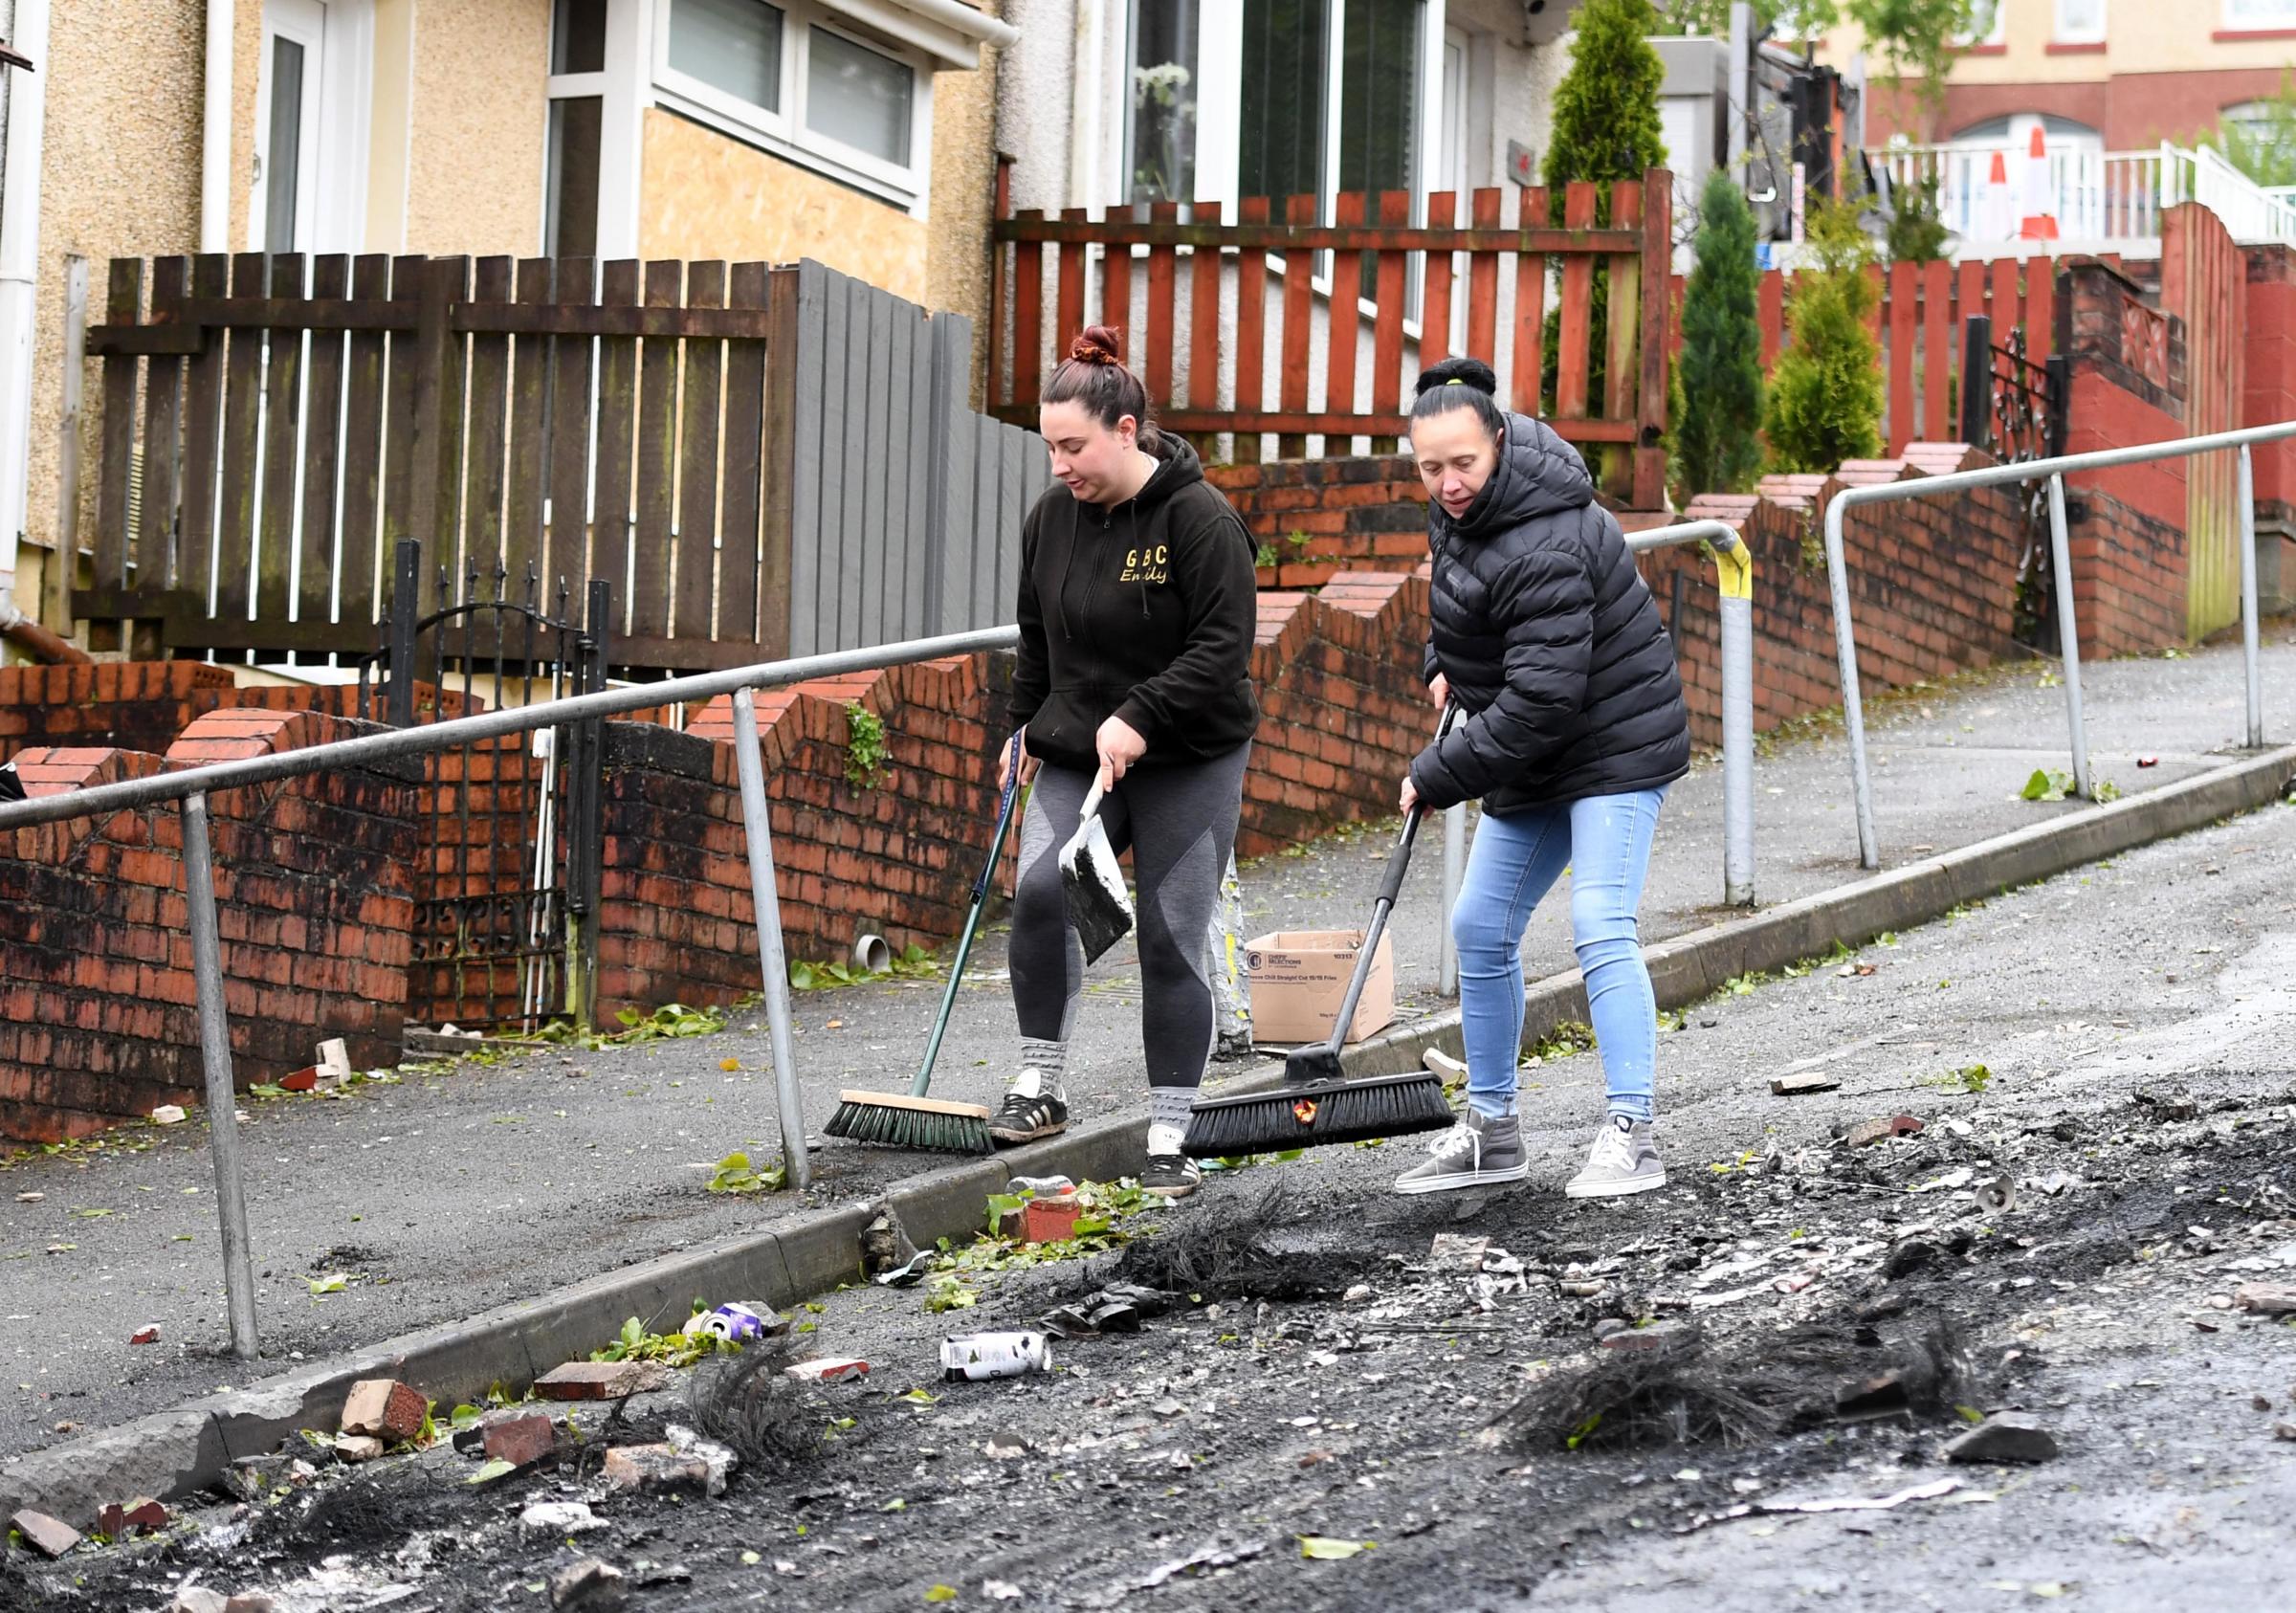 21.05.21 - Local residents and council workers clear up after cars were burnt out and windows smashed during the violence and riots in the Mayhill area of Swansea, South Wales last night. Pictures: Huw Evans Agency